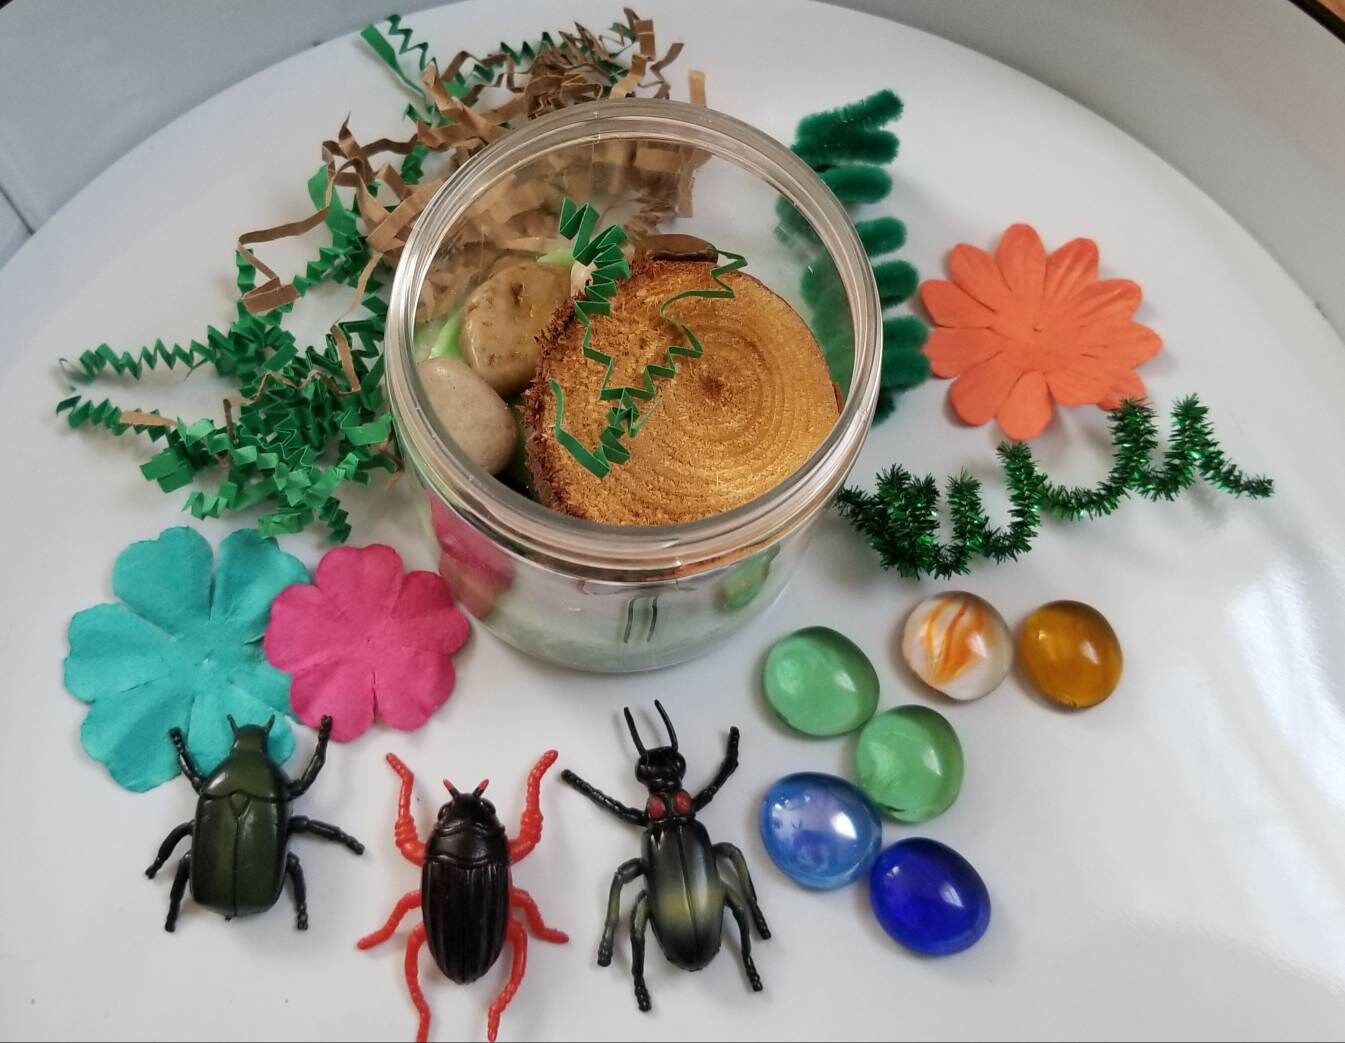 Insect play kit